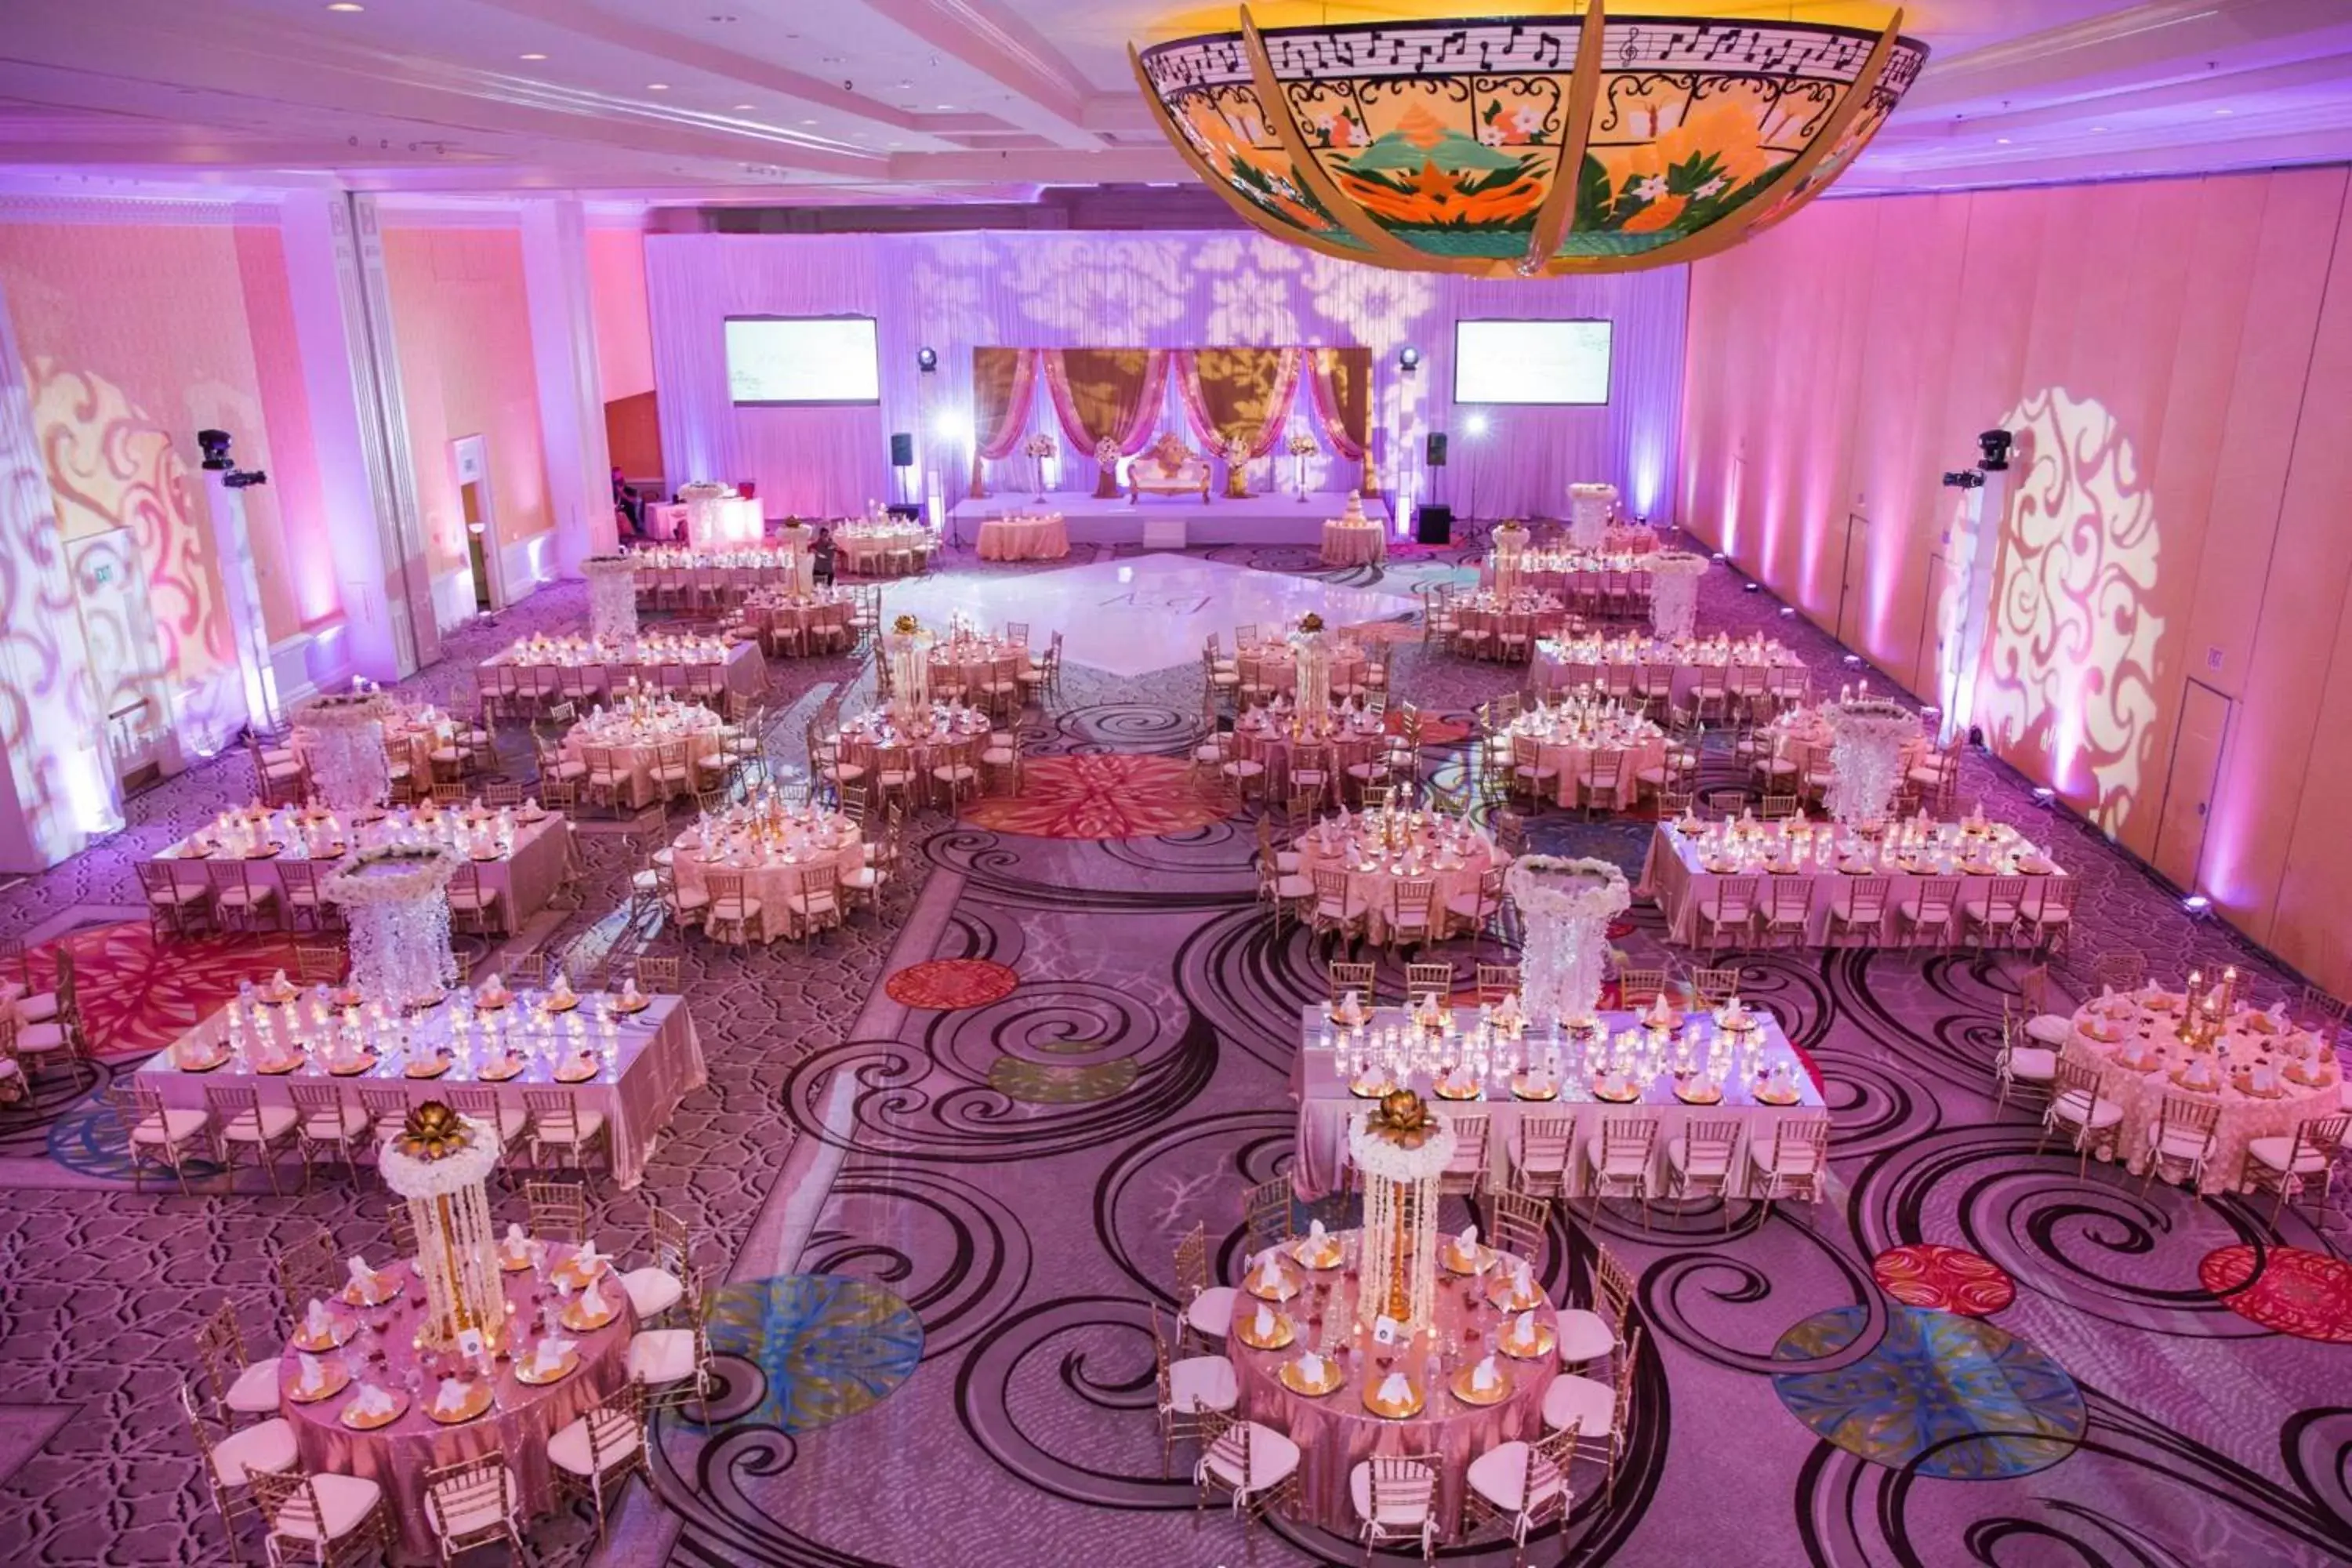 Banquet/Function facilities, Banquet Facilities in Gaylord Palms Resort & Convention Center